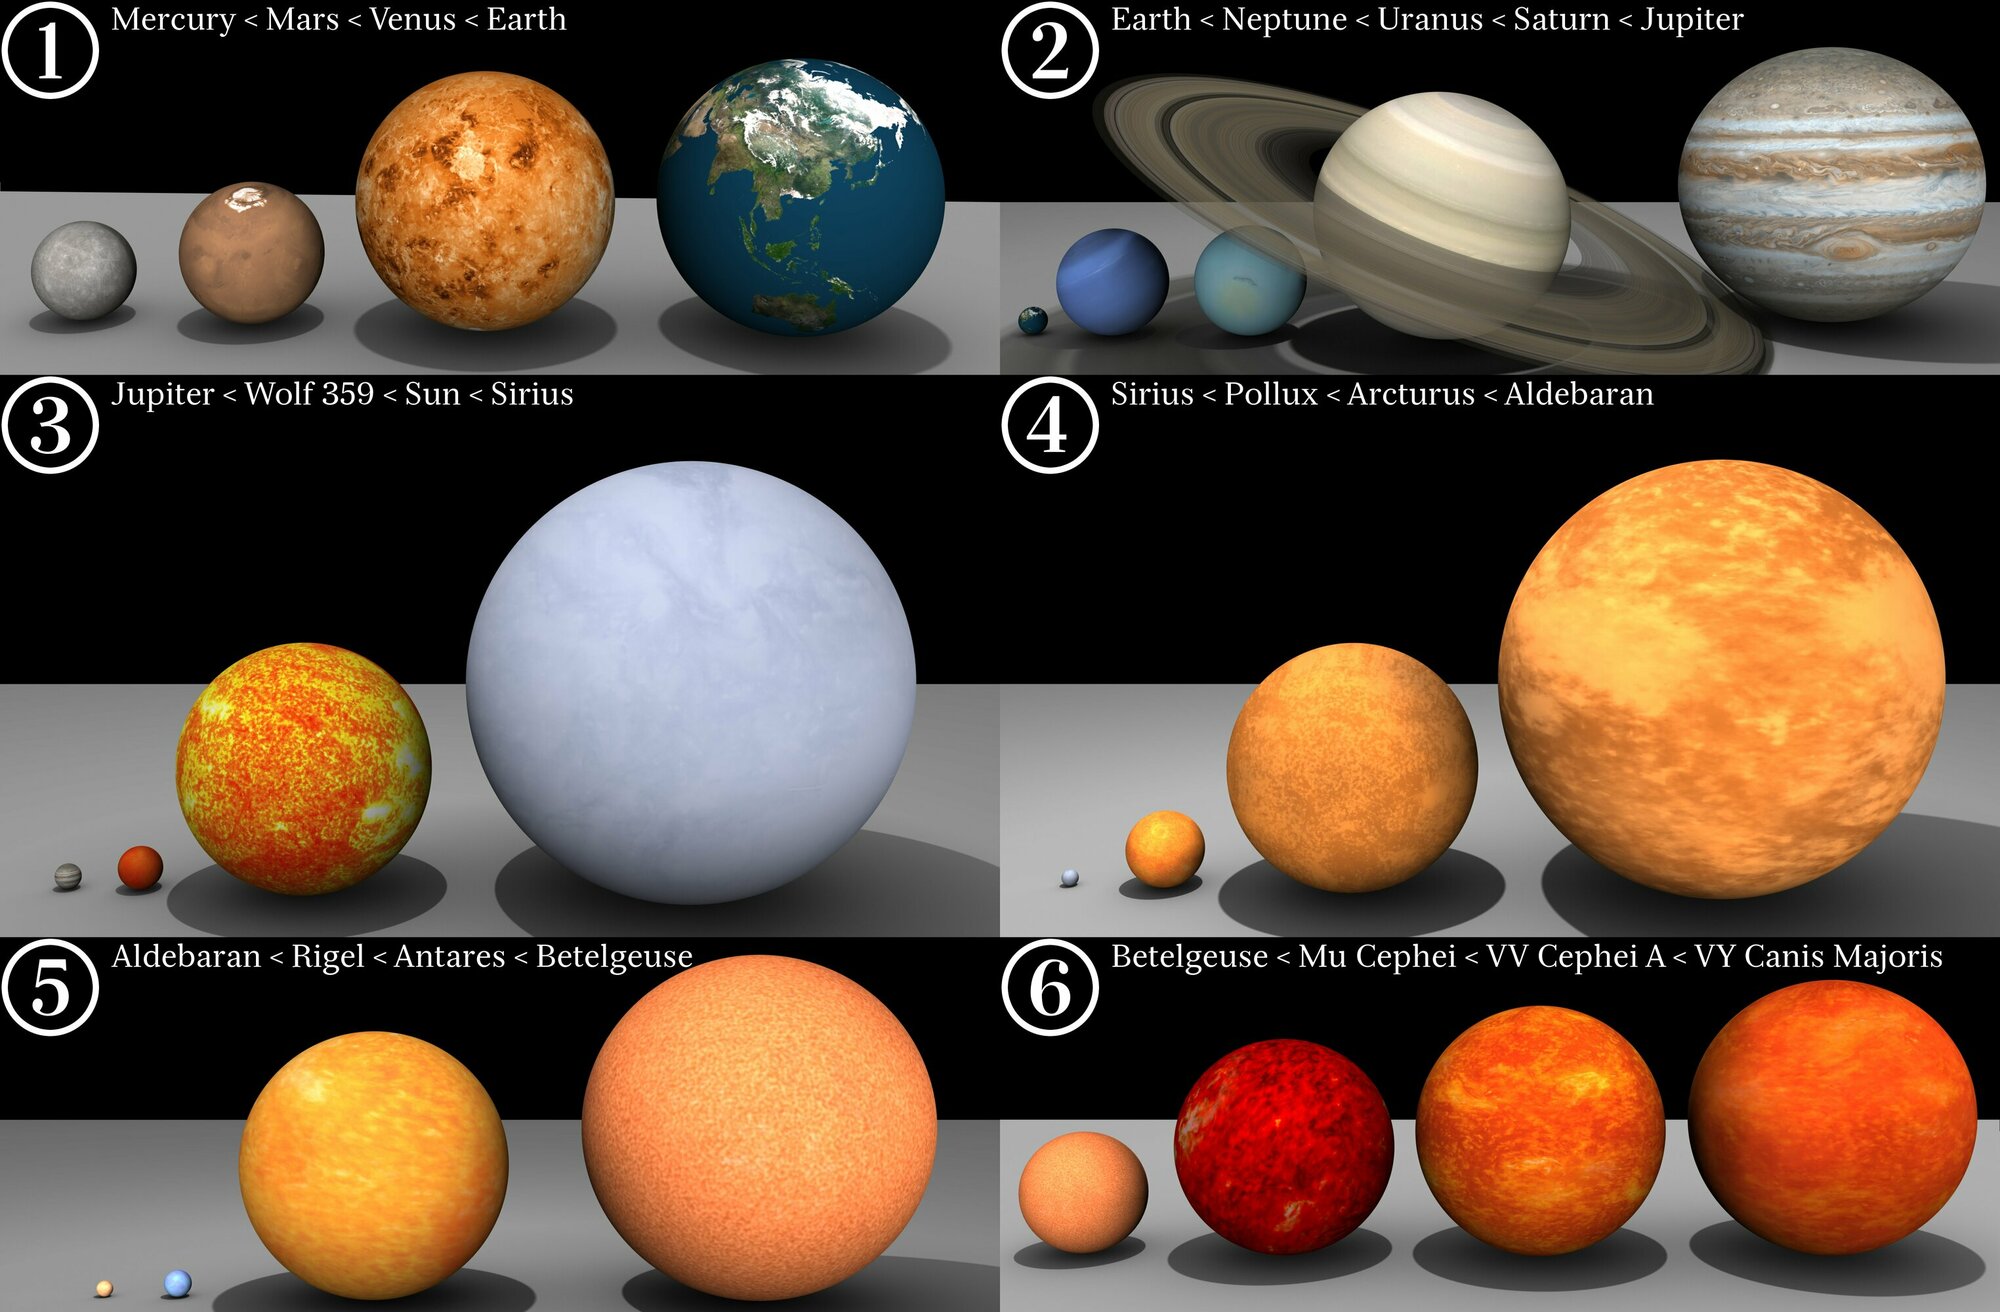 Star & Planet Sizes Compared (Mercury to VY Canis Majoris)